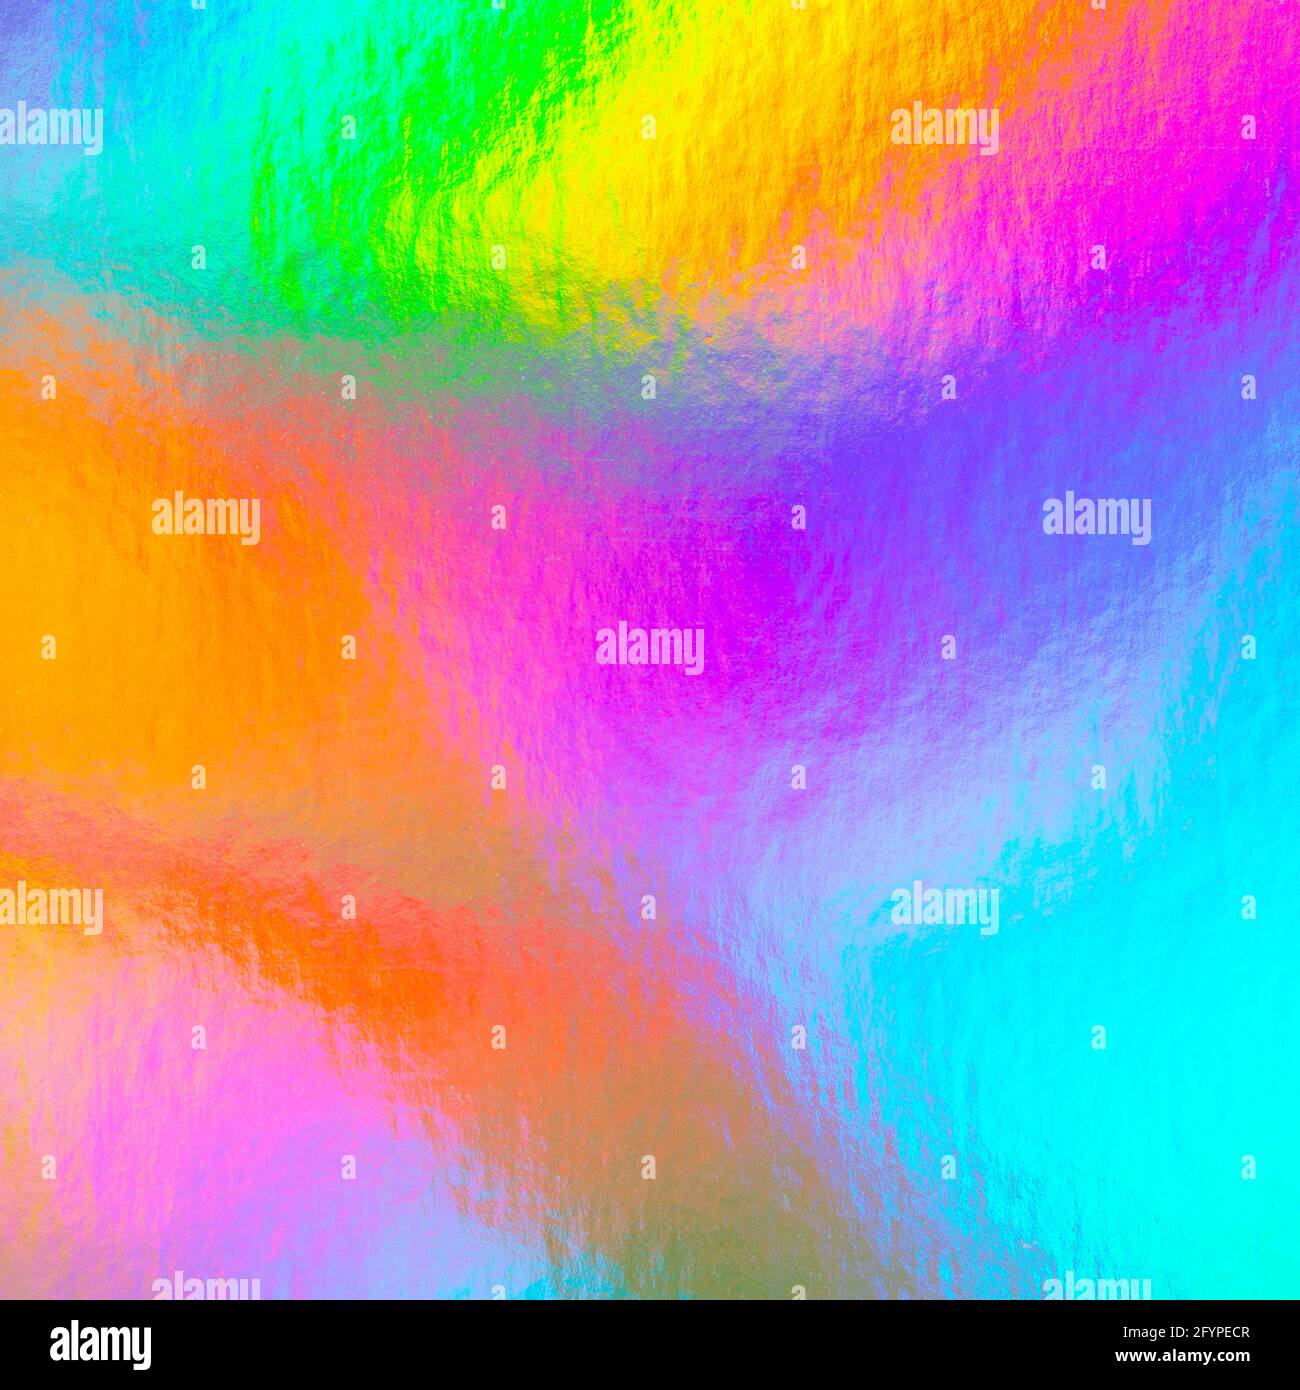 Metal texture background of rainbow colors Stock Photo